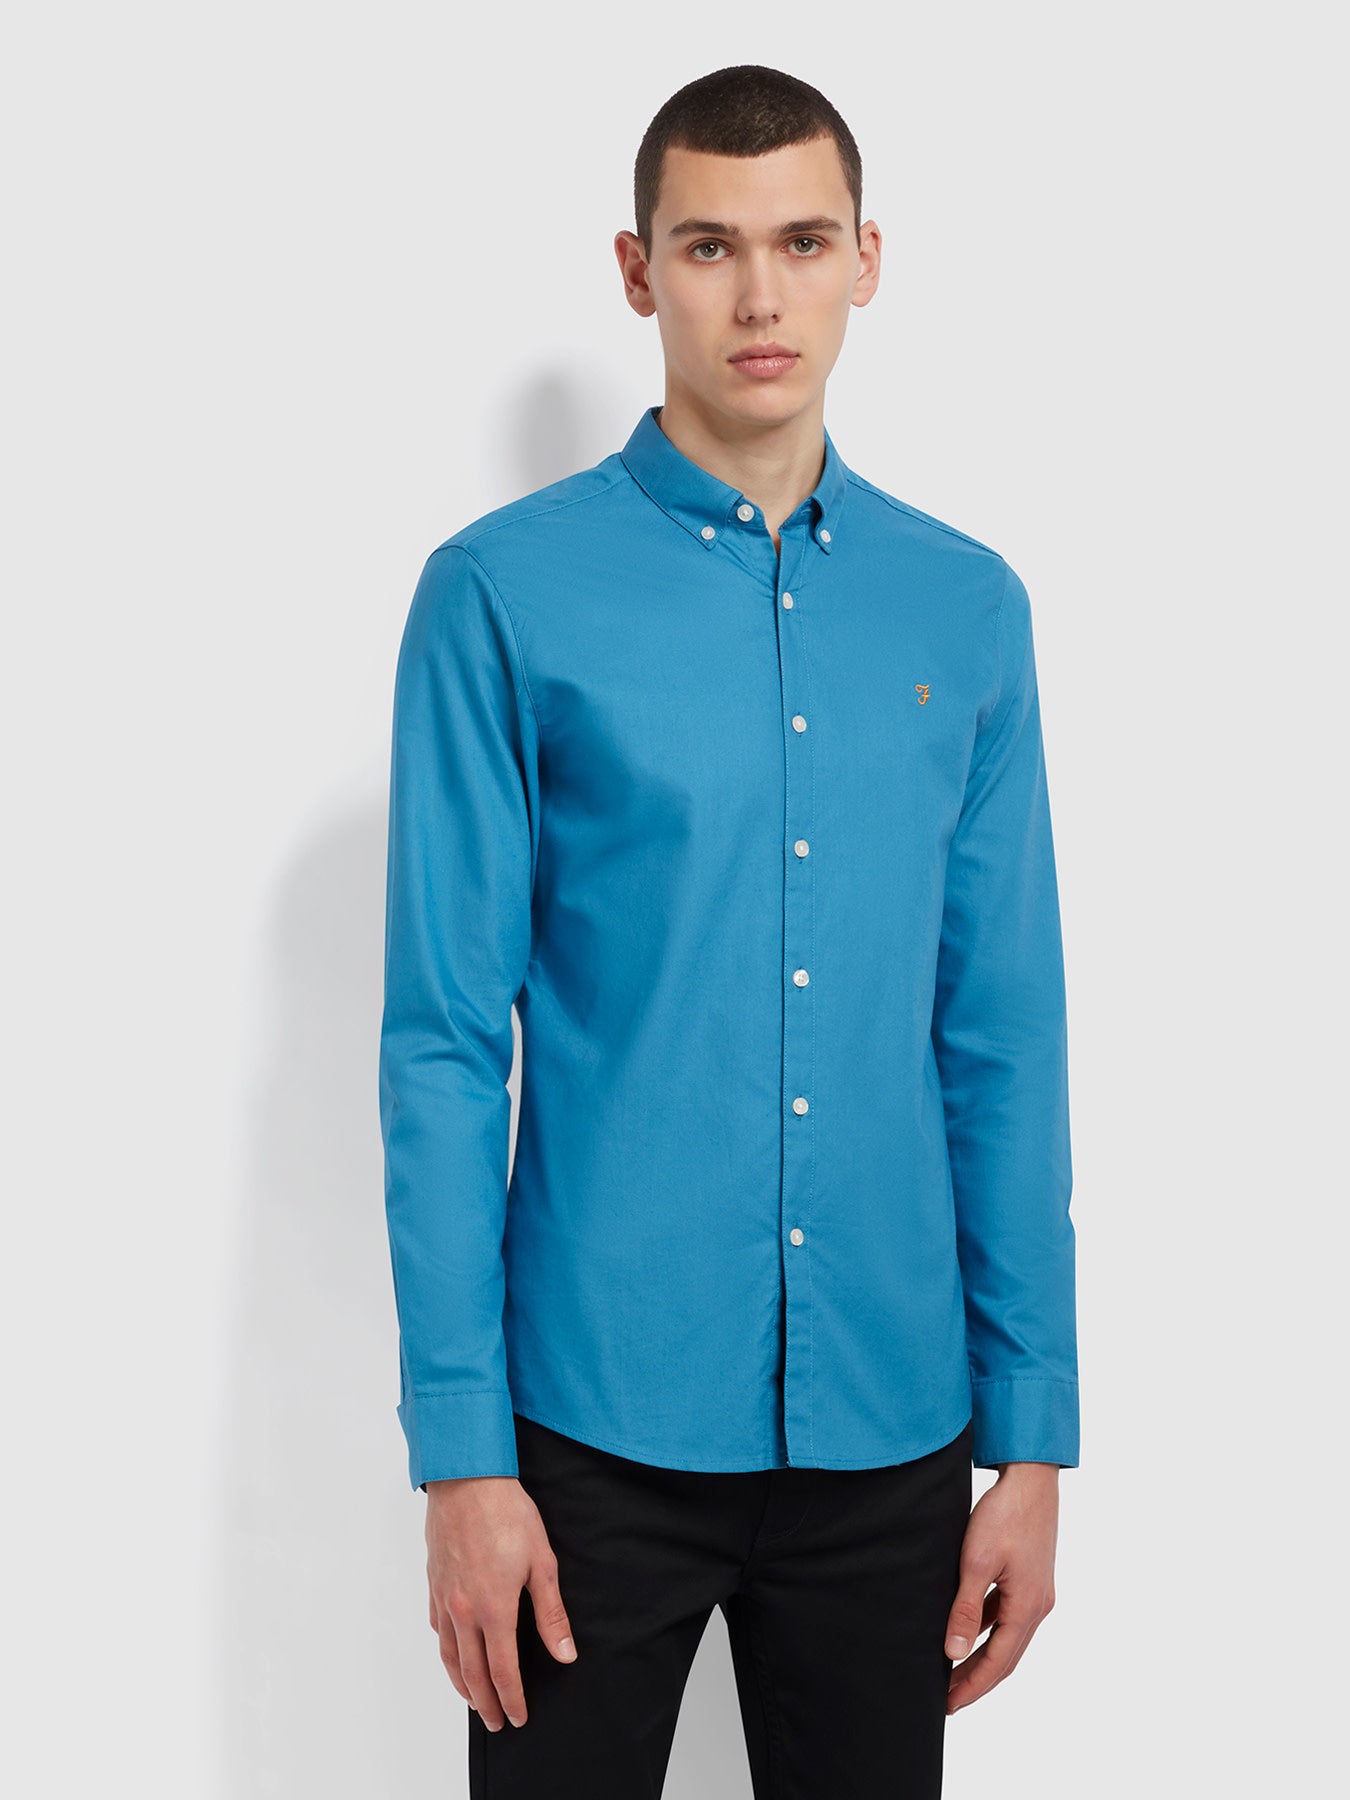 View Brewer Slim Fit Organic Cotton Oxford Shirt In Maritime Blue information